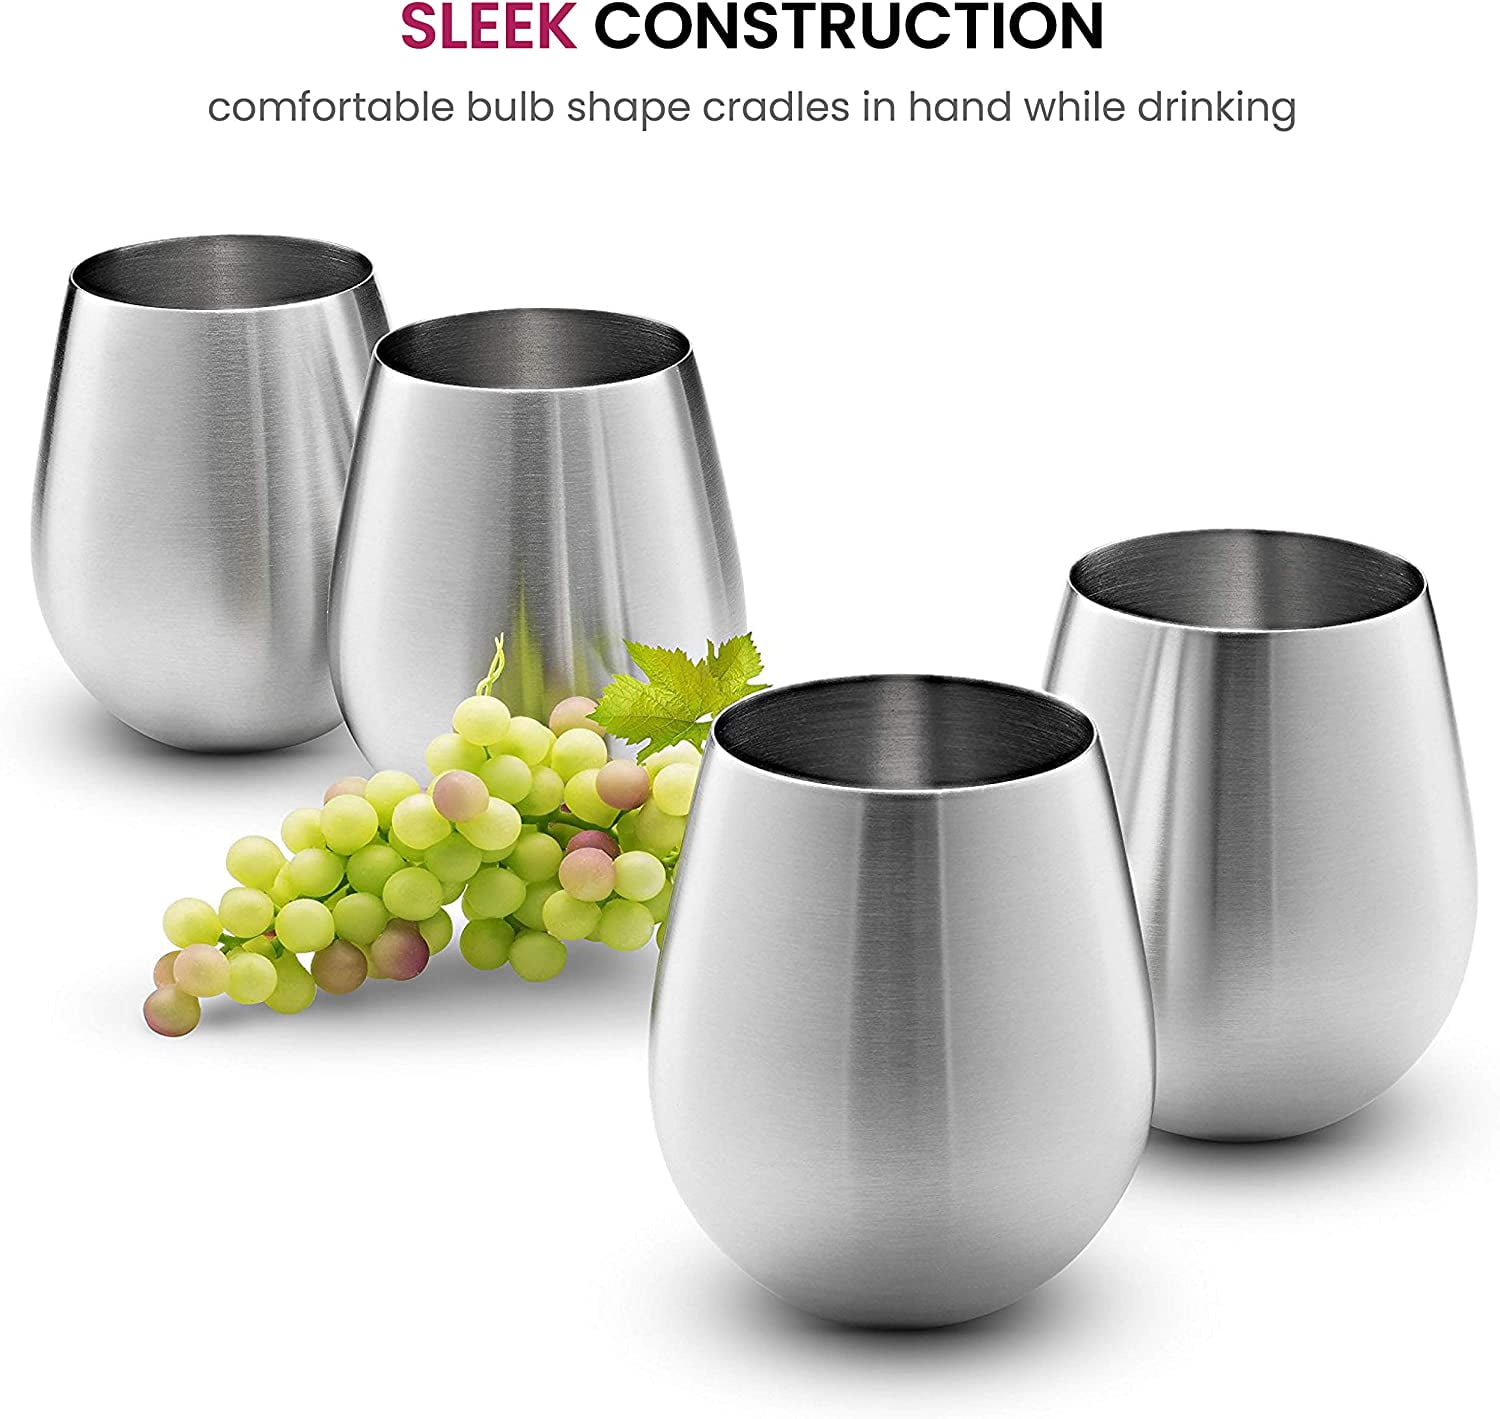 BENETI Stemless Wine Glasses [Set of 4] 17 Ounce, German Made